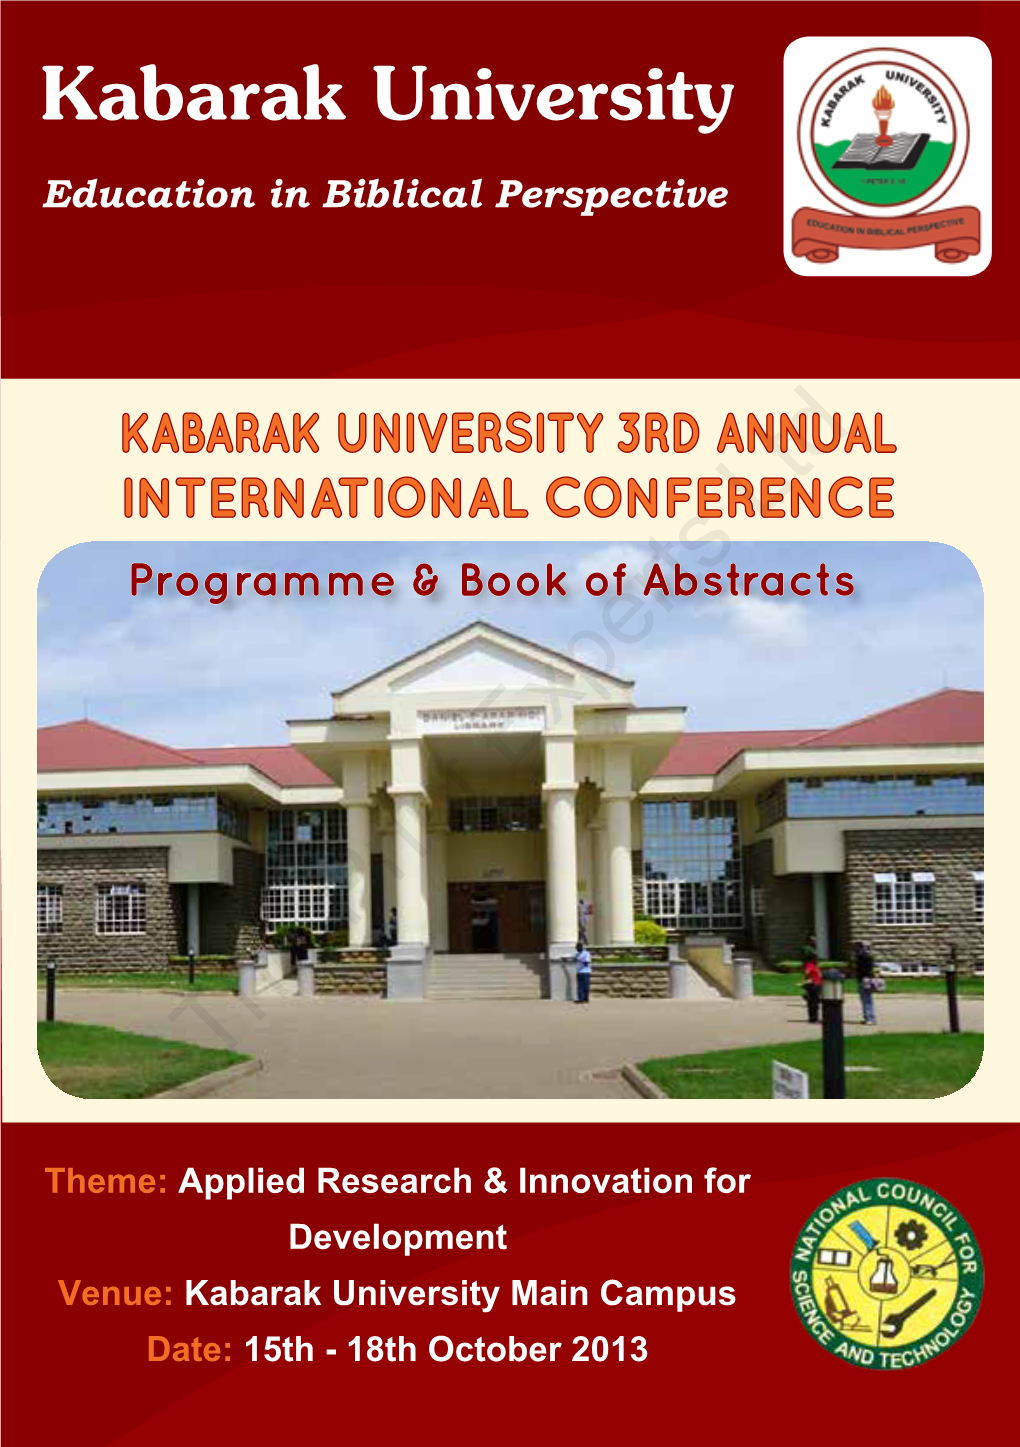 Kabarak University 3Rd Annual International Conference - Programme & Book of Abstracts Kabarak University Education in Biblical Perspective